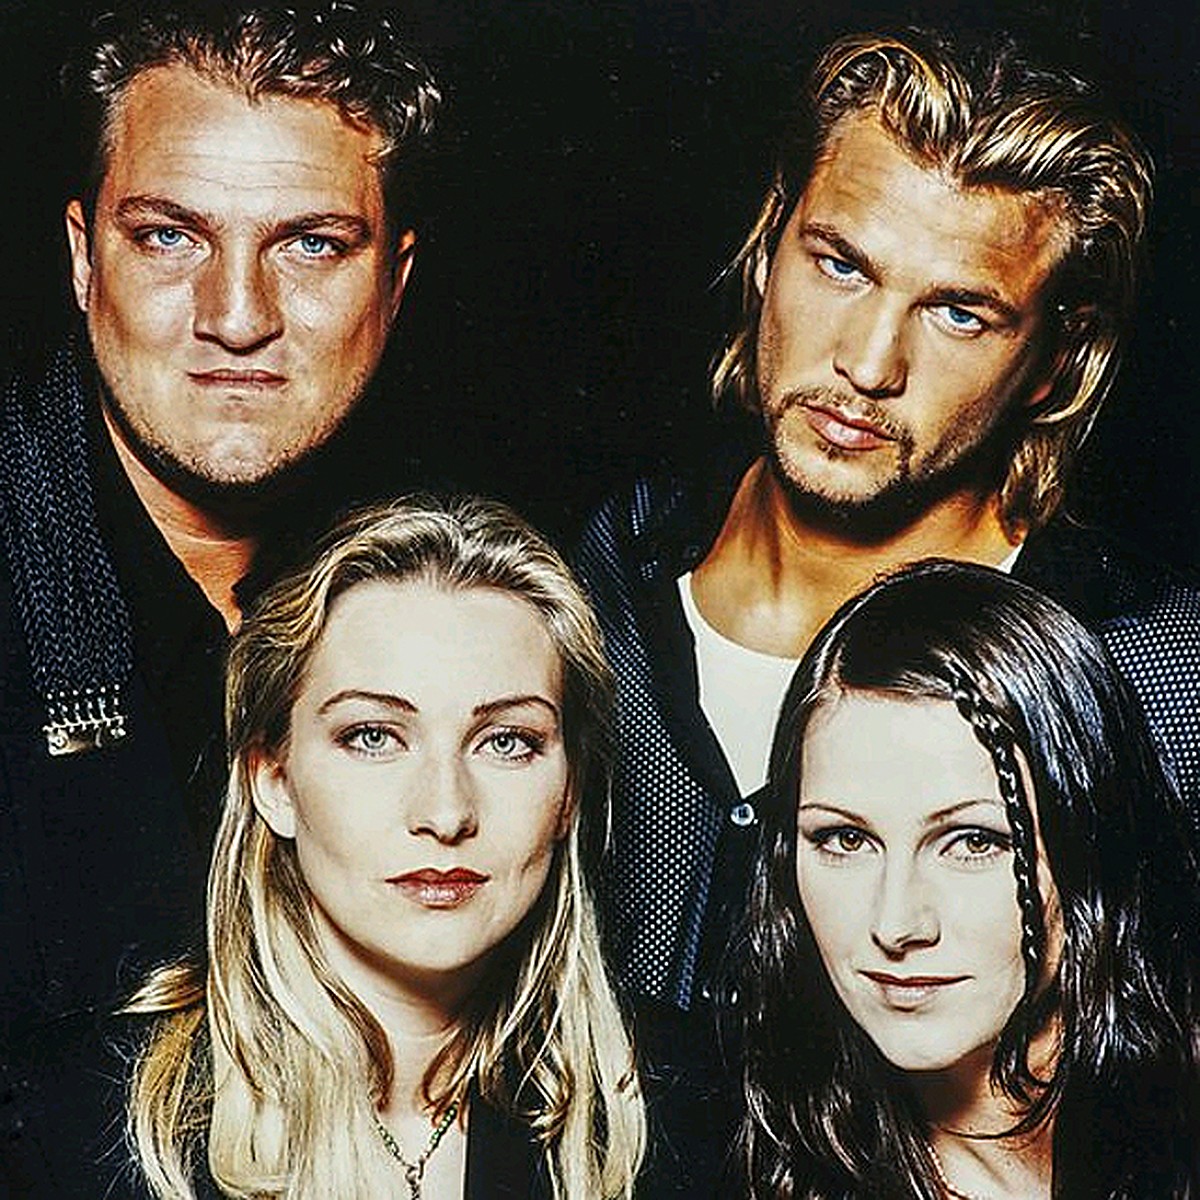 Mandee feat ace of base. Группа Ace of Base. Группа Ace of Base сейчас. Ace of Base 1997. Группа Ace of Base 2020.